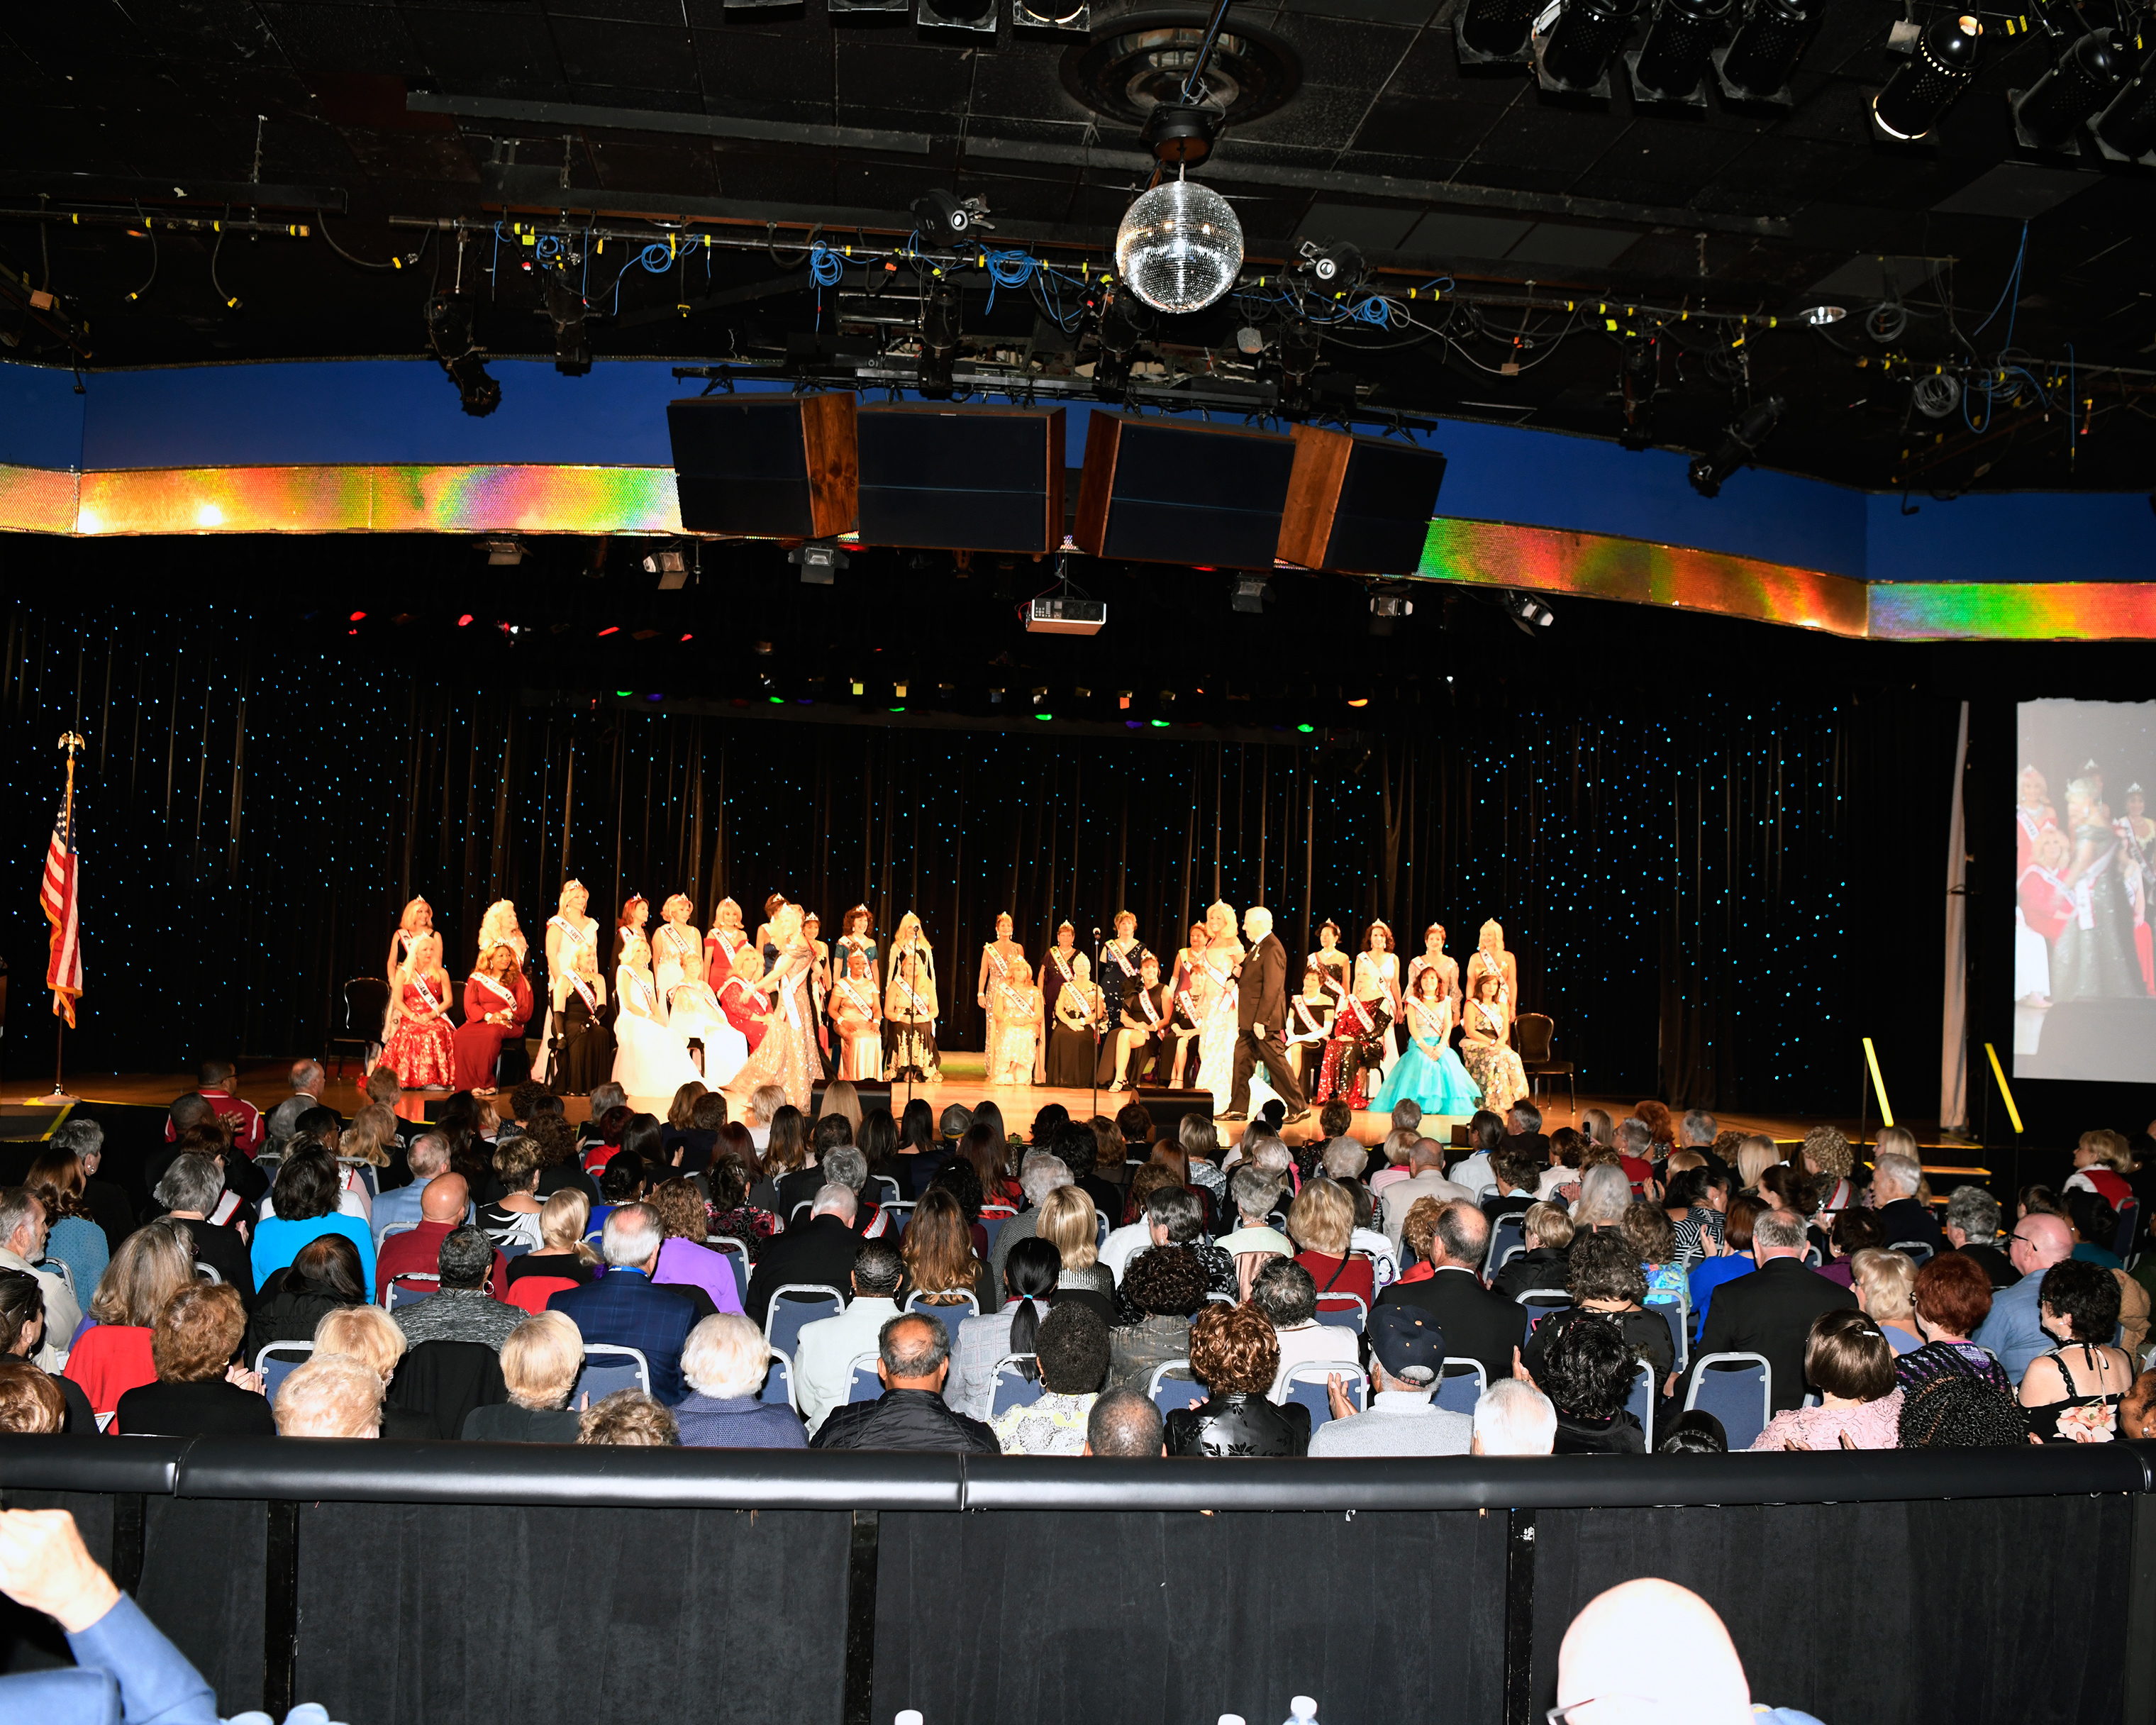 All the of the contestants line-up before the top 10 finalists are announced at the Ms. Senior America Pageant in Atlantic City, N.J. on Oct. 18, 2018. (Rosa Polin for TIME)